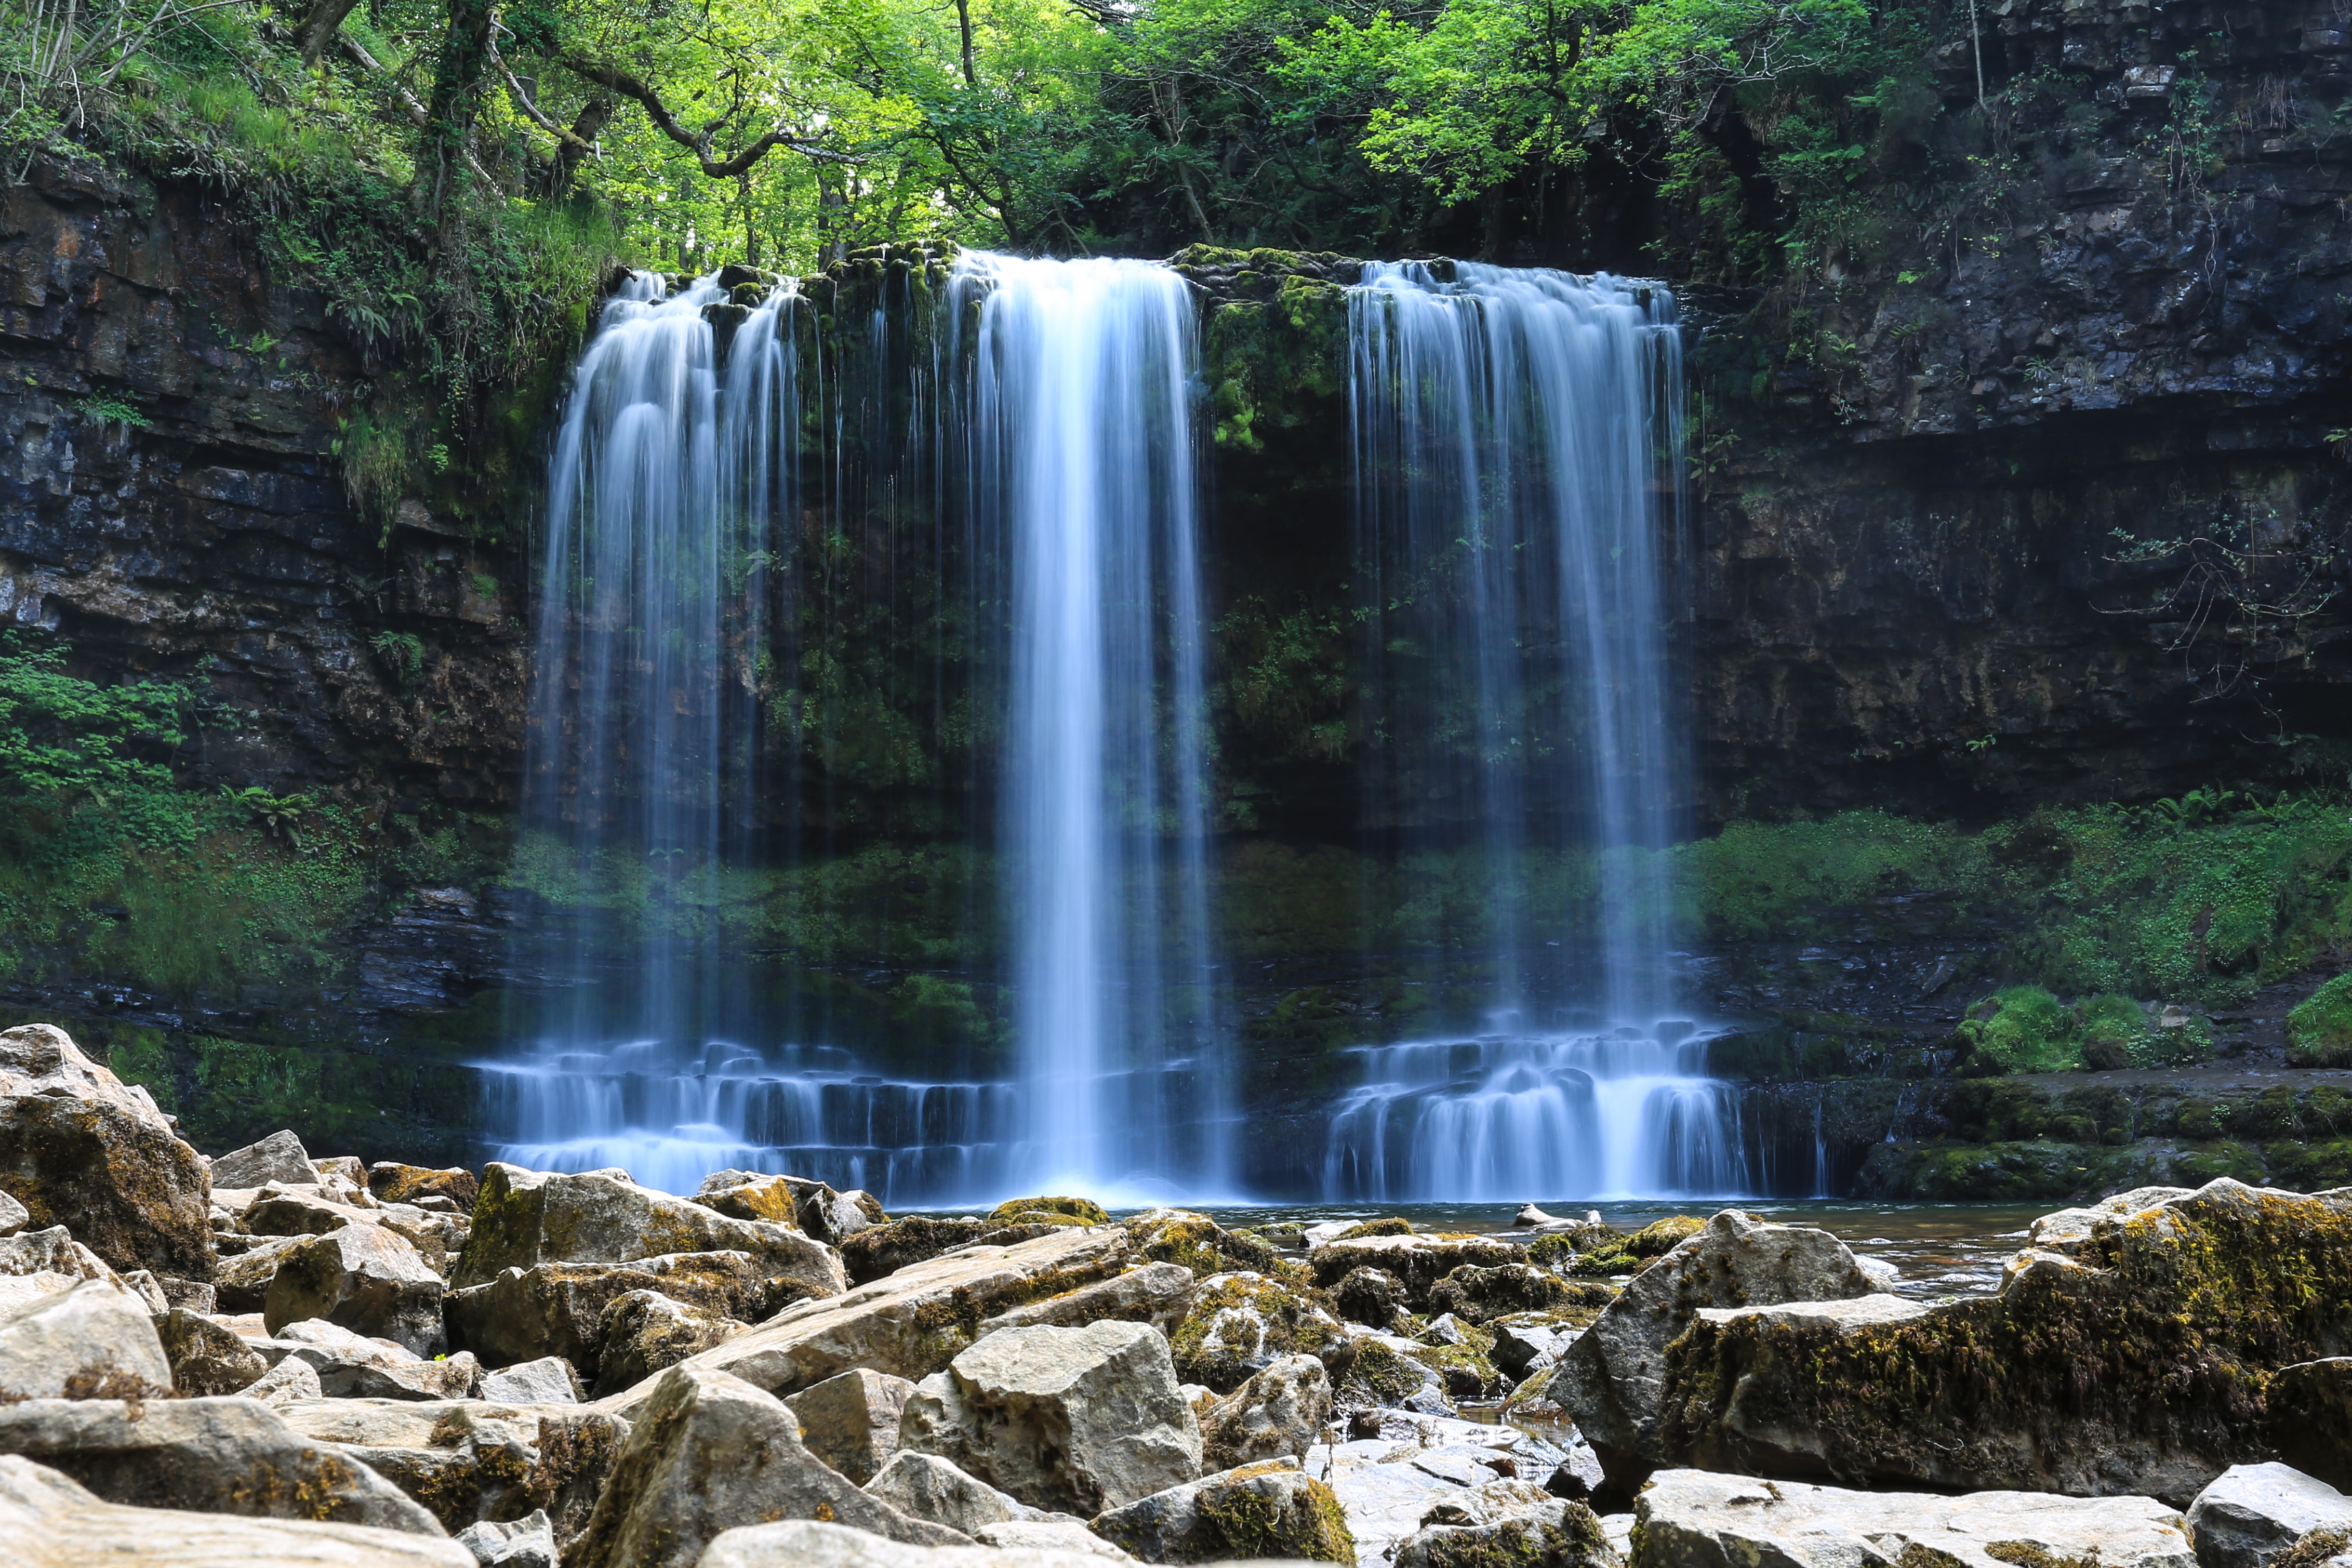 You could take a walk to the Waterfalls near Ystradfellte on Afon Hepste